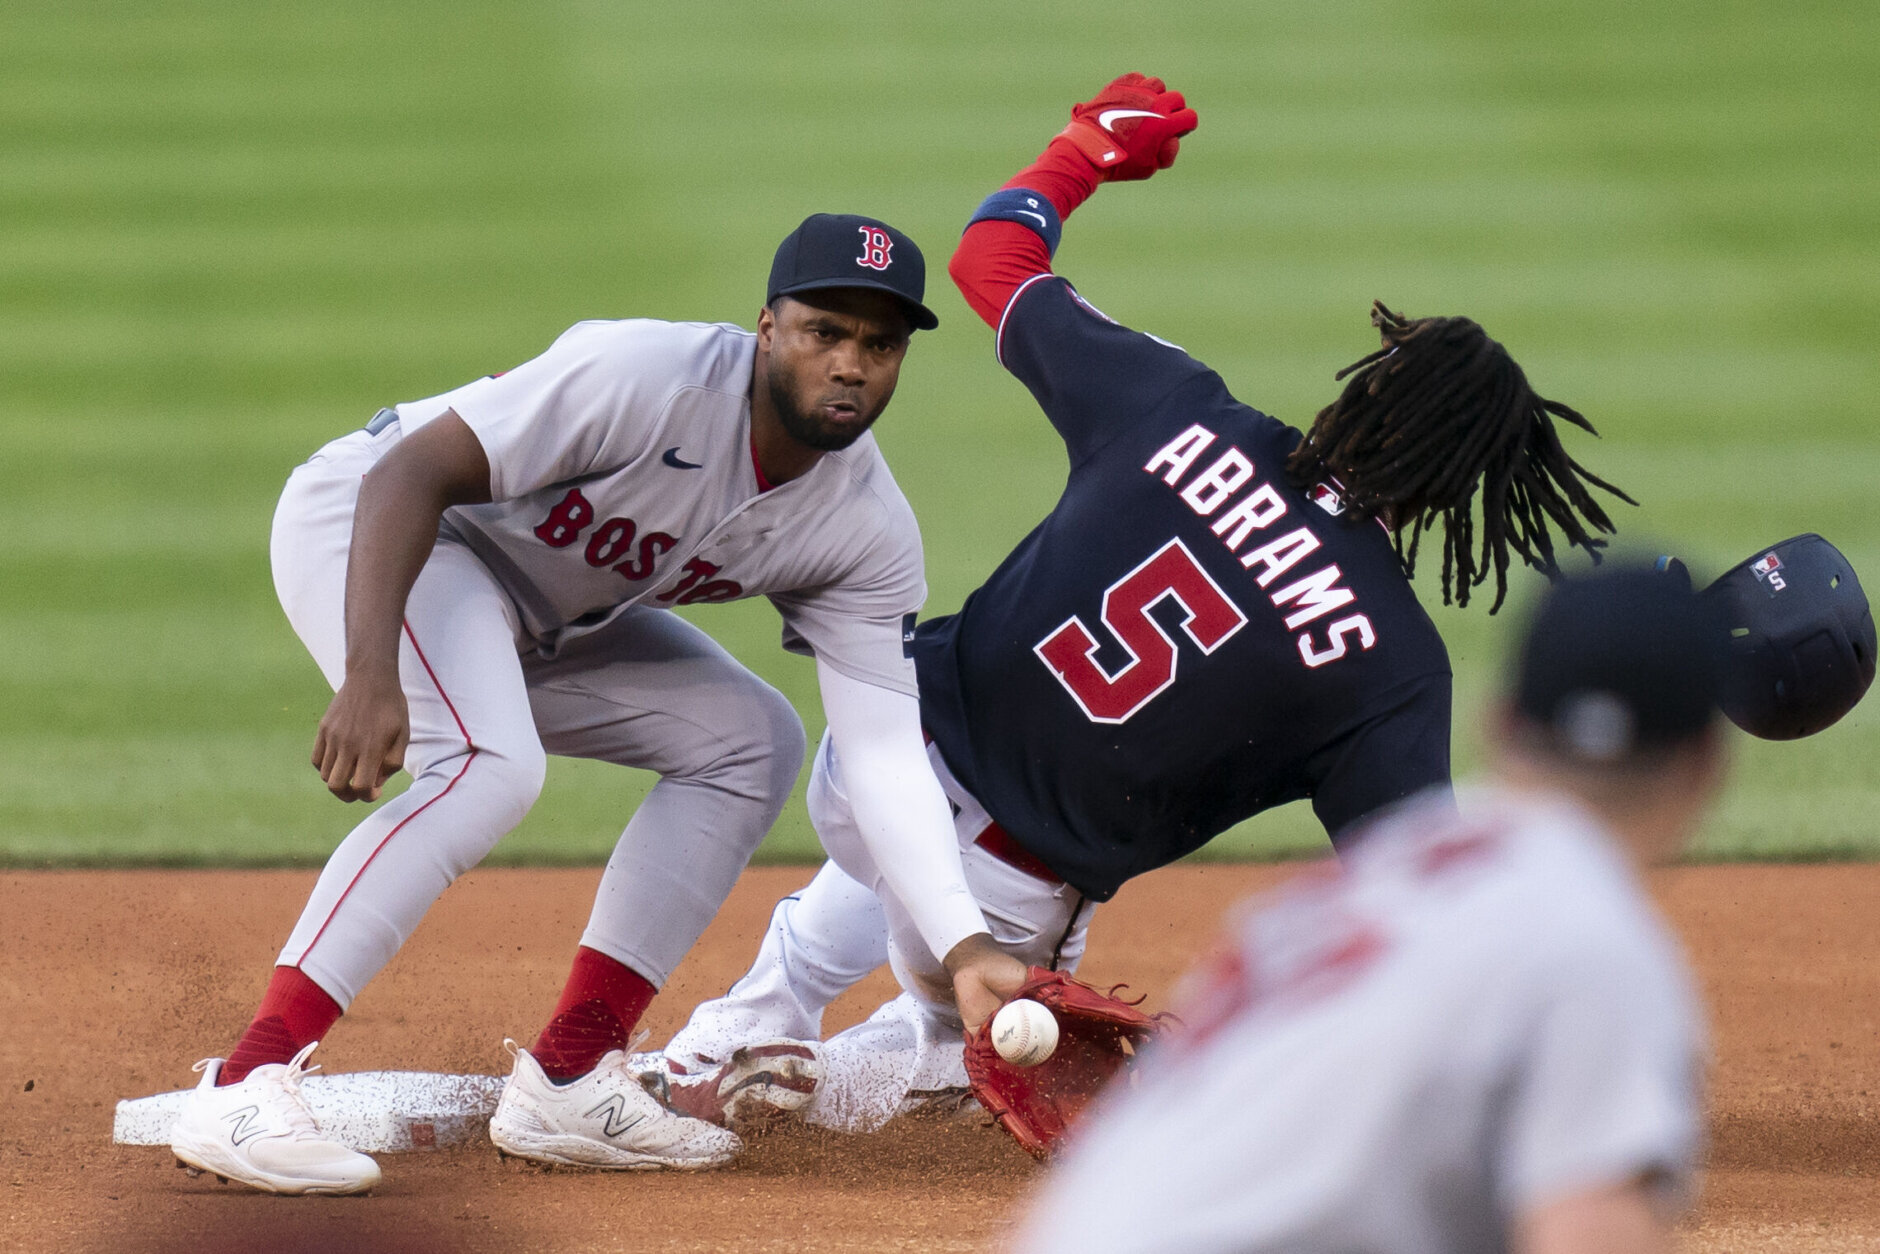 Ex-Dodgers Turner, Verdugo lift Red Sox to chaotic 8-5 victory over LA